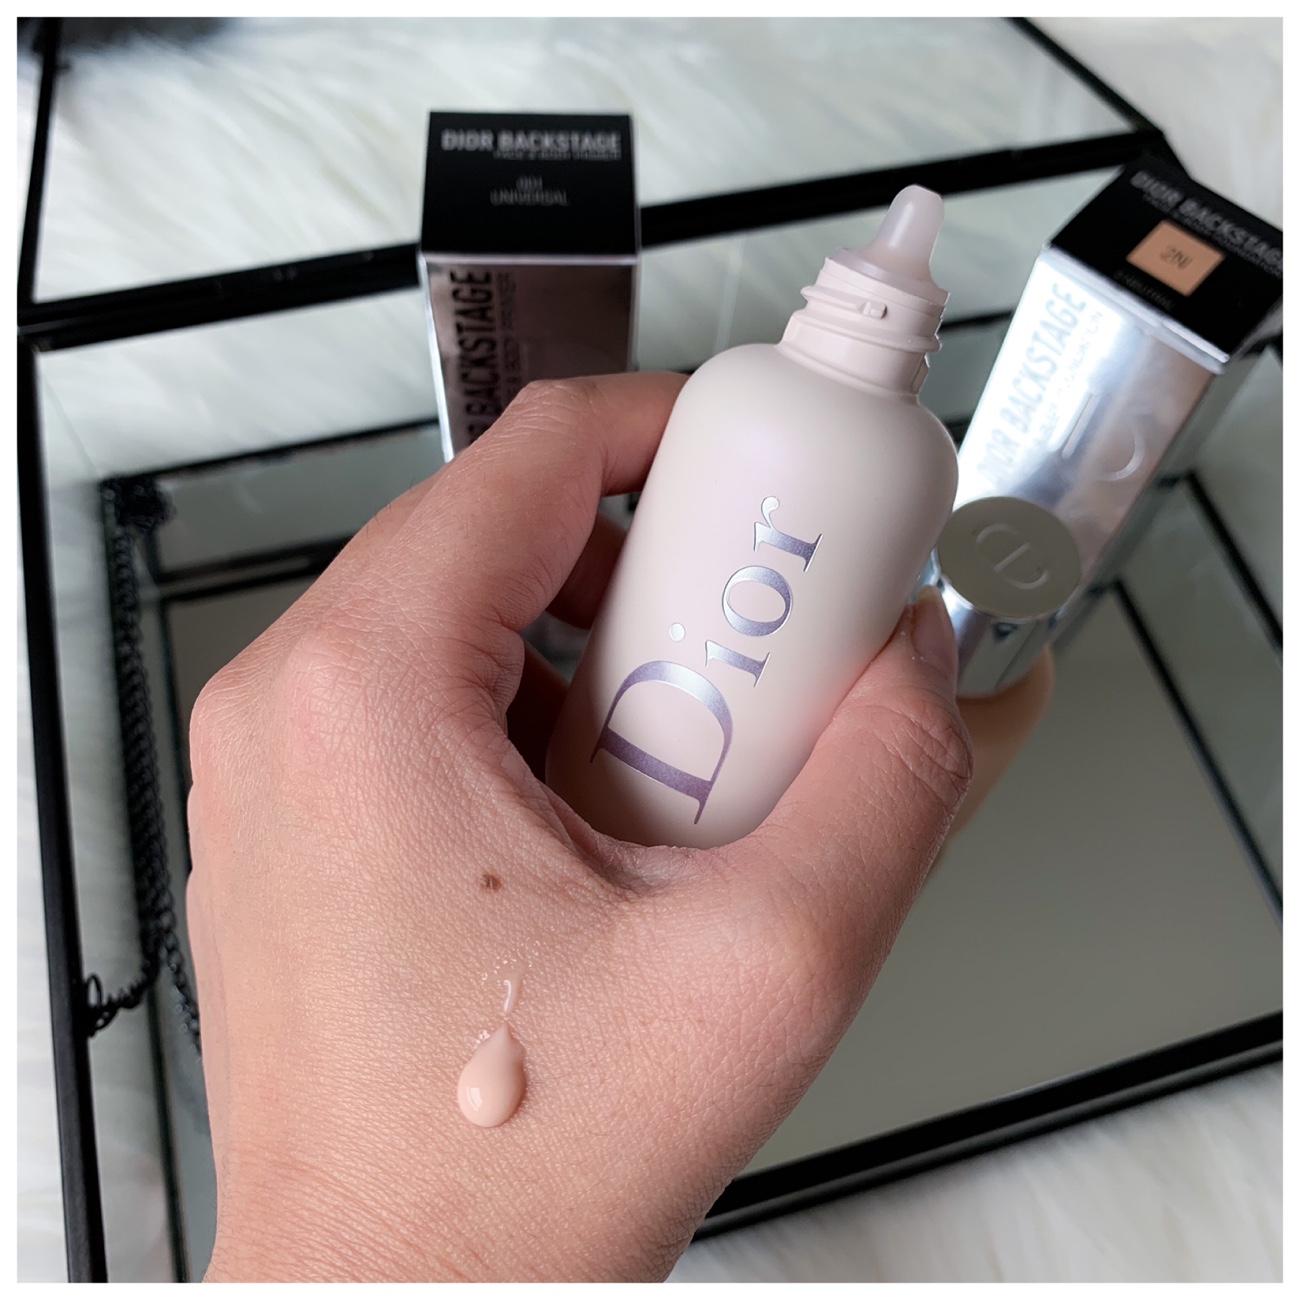 dior backstage face & body primer review